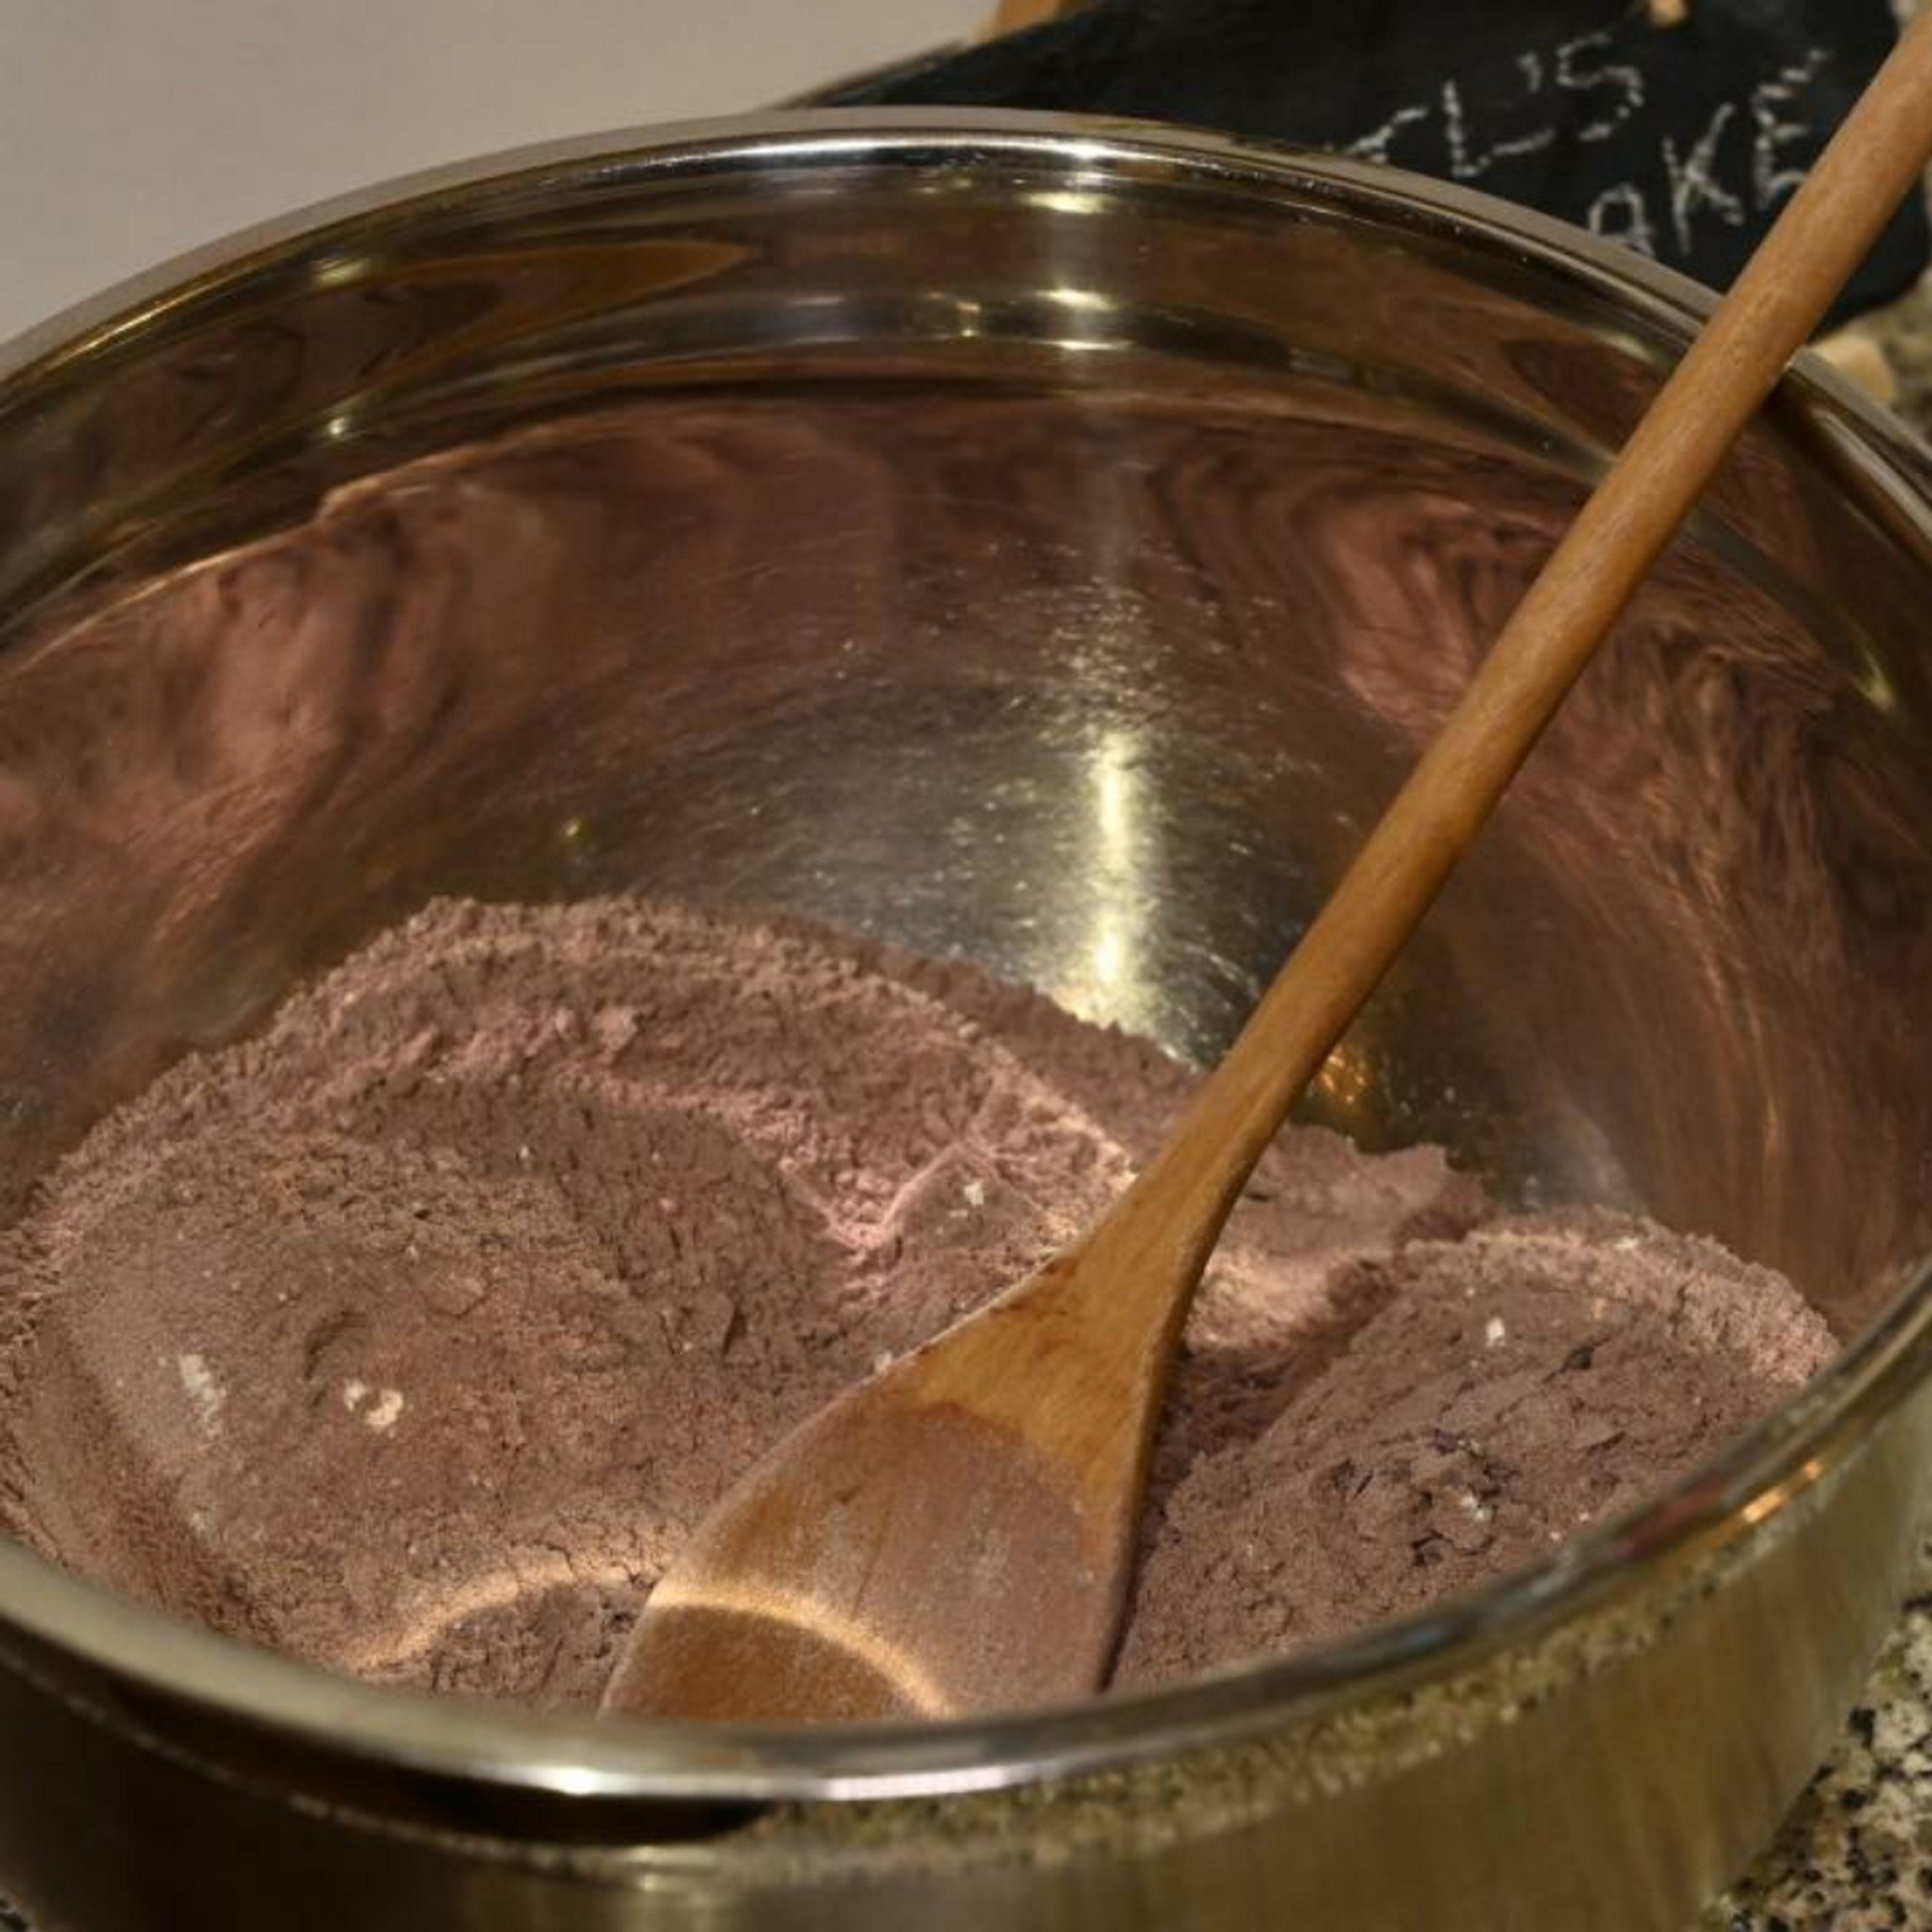 In a bowl mix together the baking powder, baking soda, cocoa powder and salt with the flour.